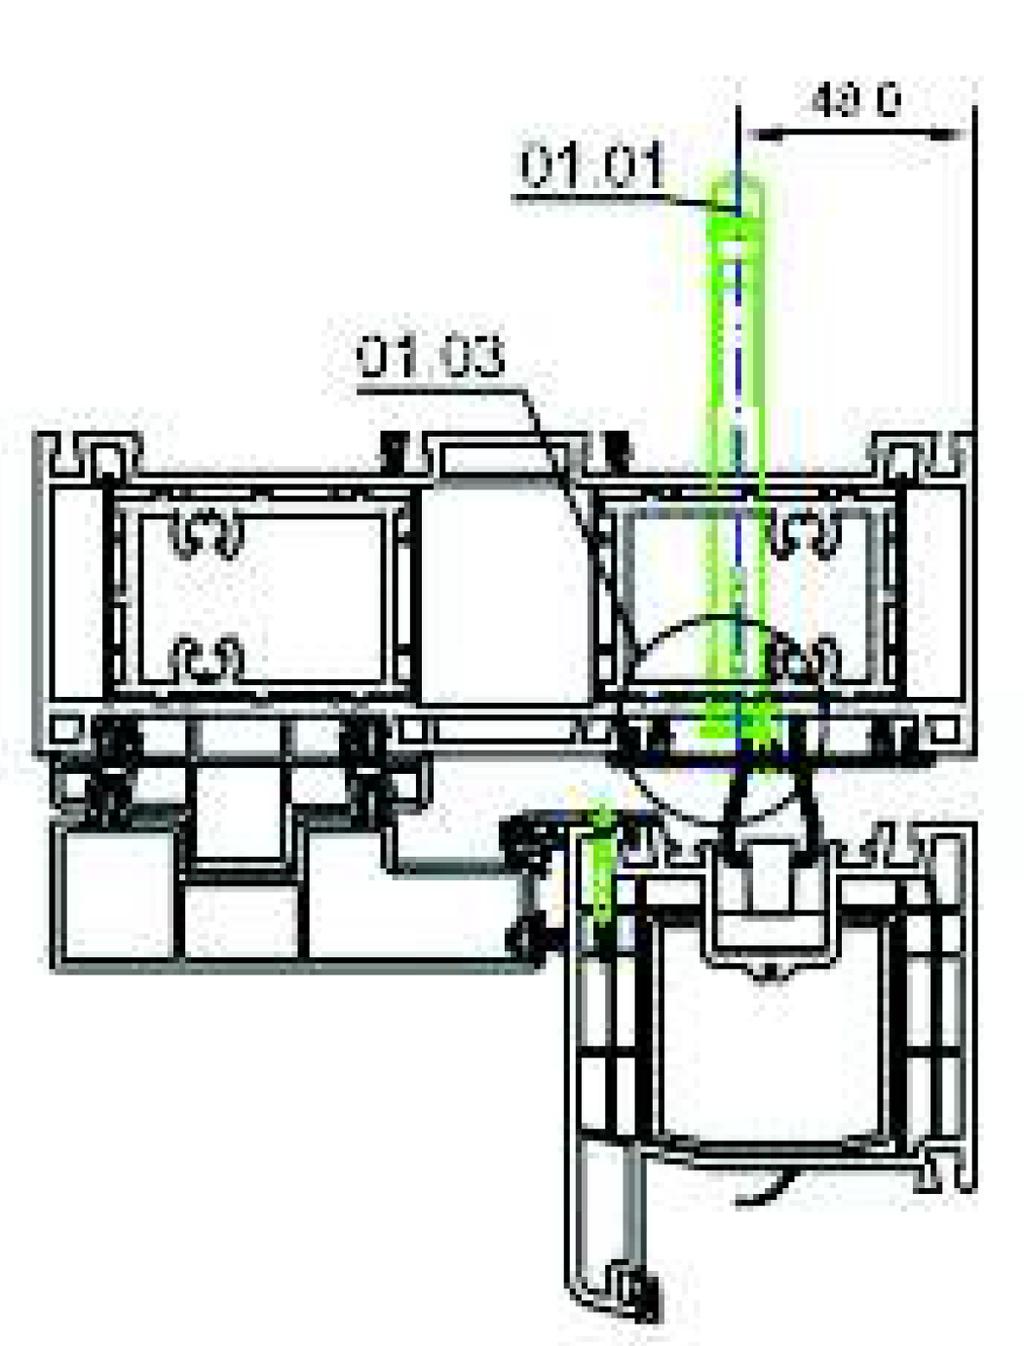 В1: Position of Anchor Mounting Holes Figure 04: Anchoring Points Anchor mounting holes can be drilled in a free frame. For distances between holes in the frame, see the figures below.